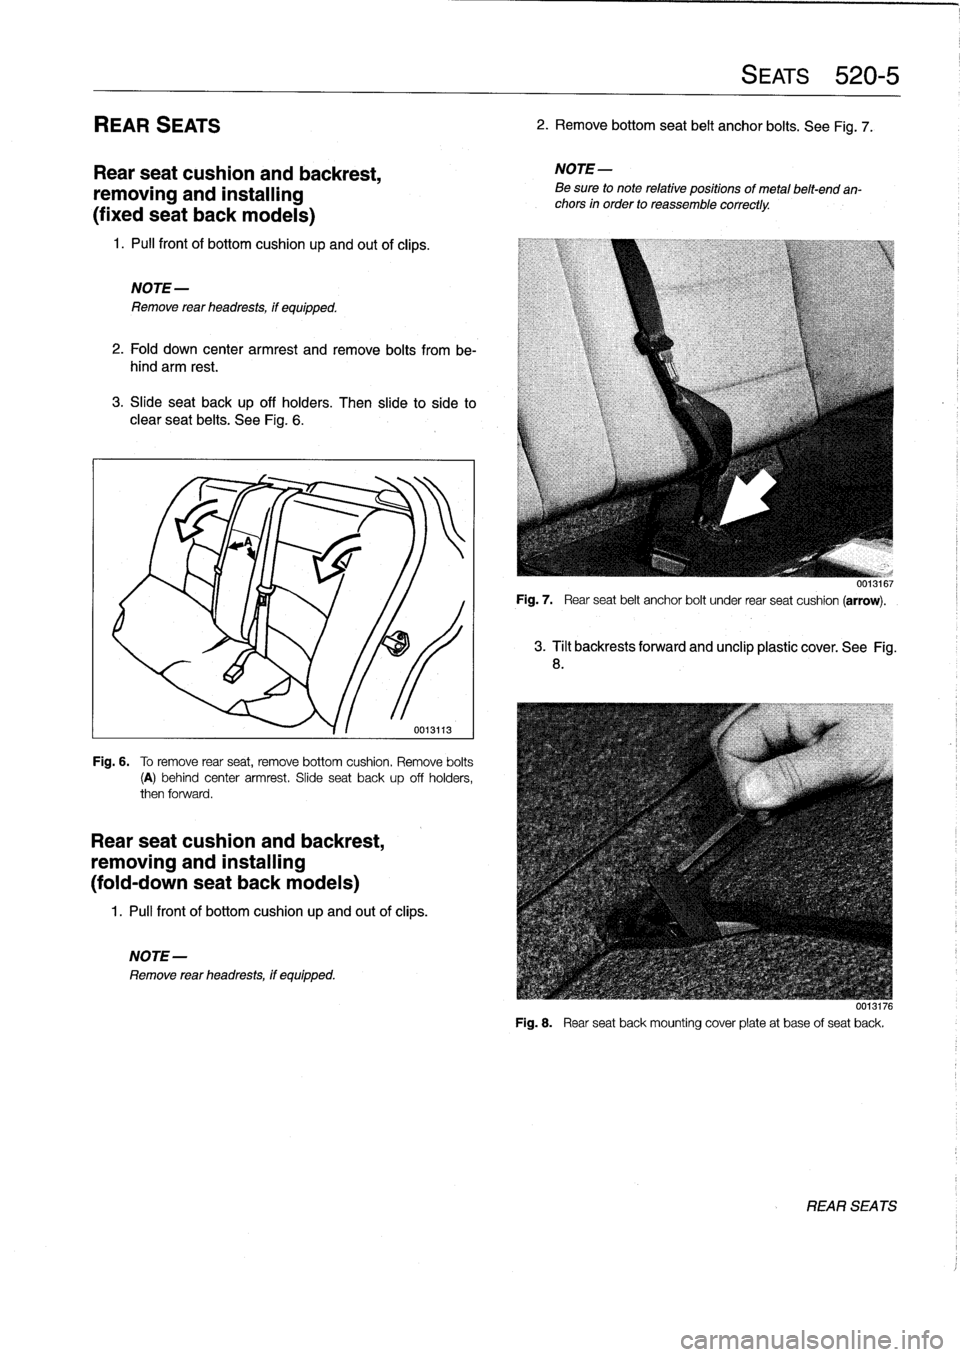 BMW 323i 1996 E36 Workshop Manual 
REAR
SEATS

Rear
seat
cushion
and
backrest,

removing
and
installing

(fixed
seat
back
modeis)

1
.
Pull
front
of
bottomcushion
up
and
out
of
clips
.

NOTE-

Remove
rear
headrests,
if
equipped
.

2
.